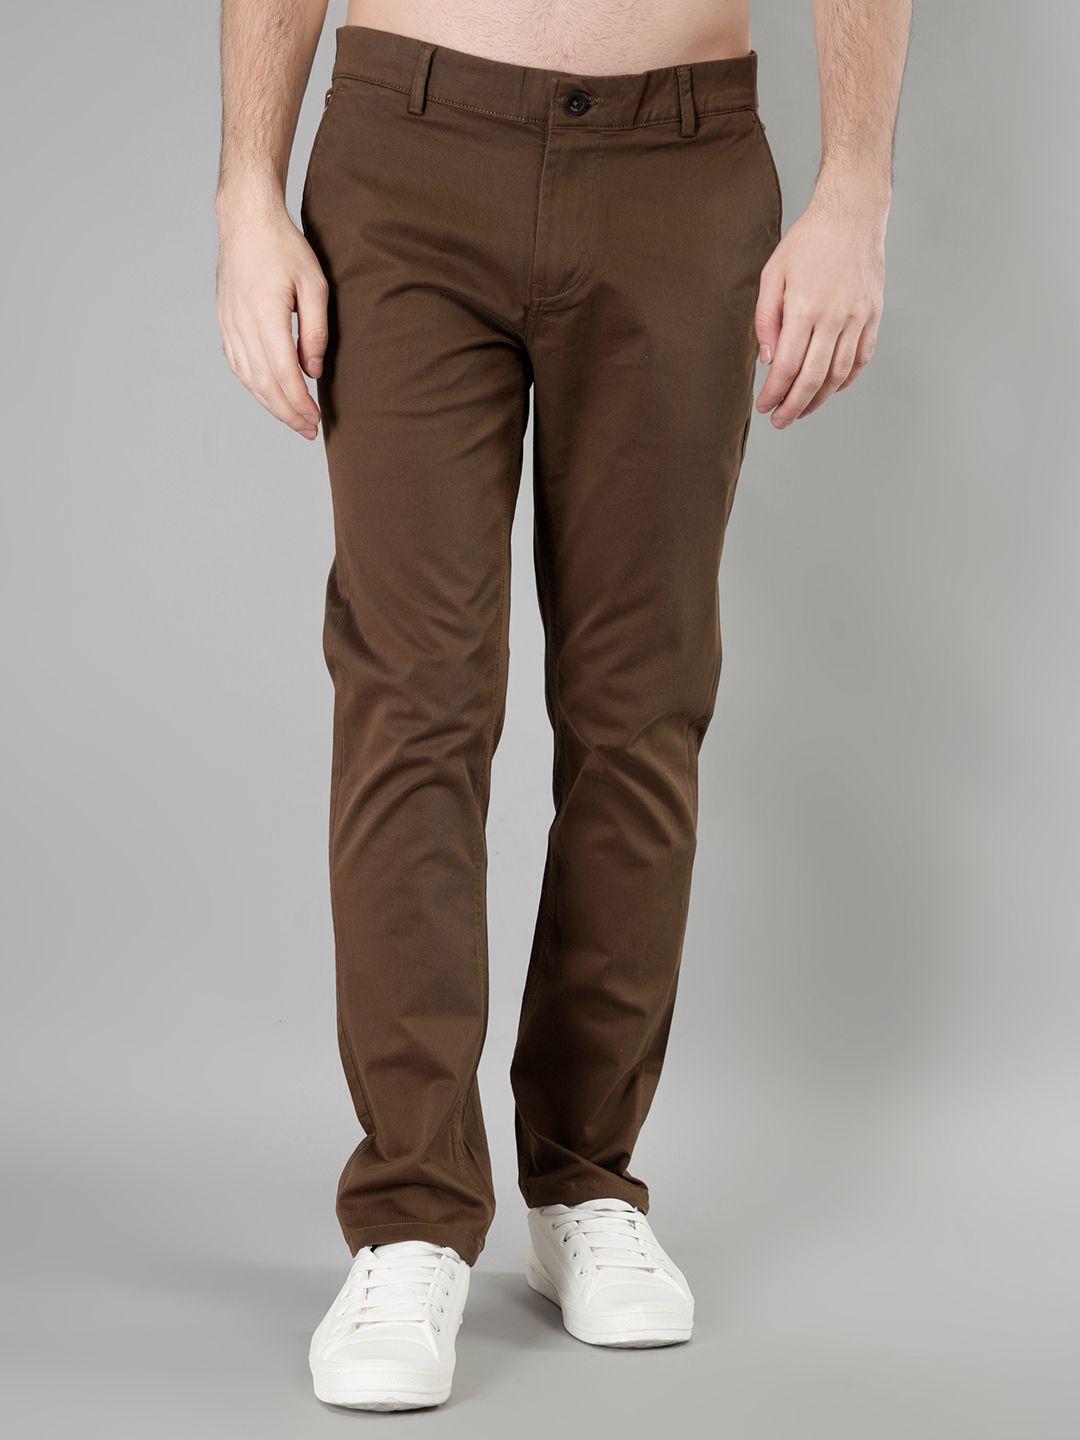 tim paris men relaxed easy wash cotton chinos